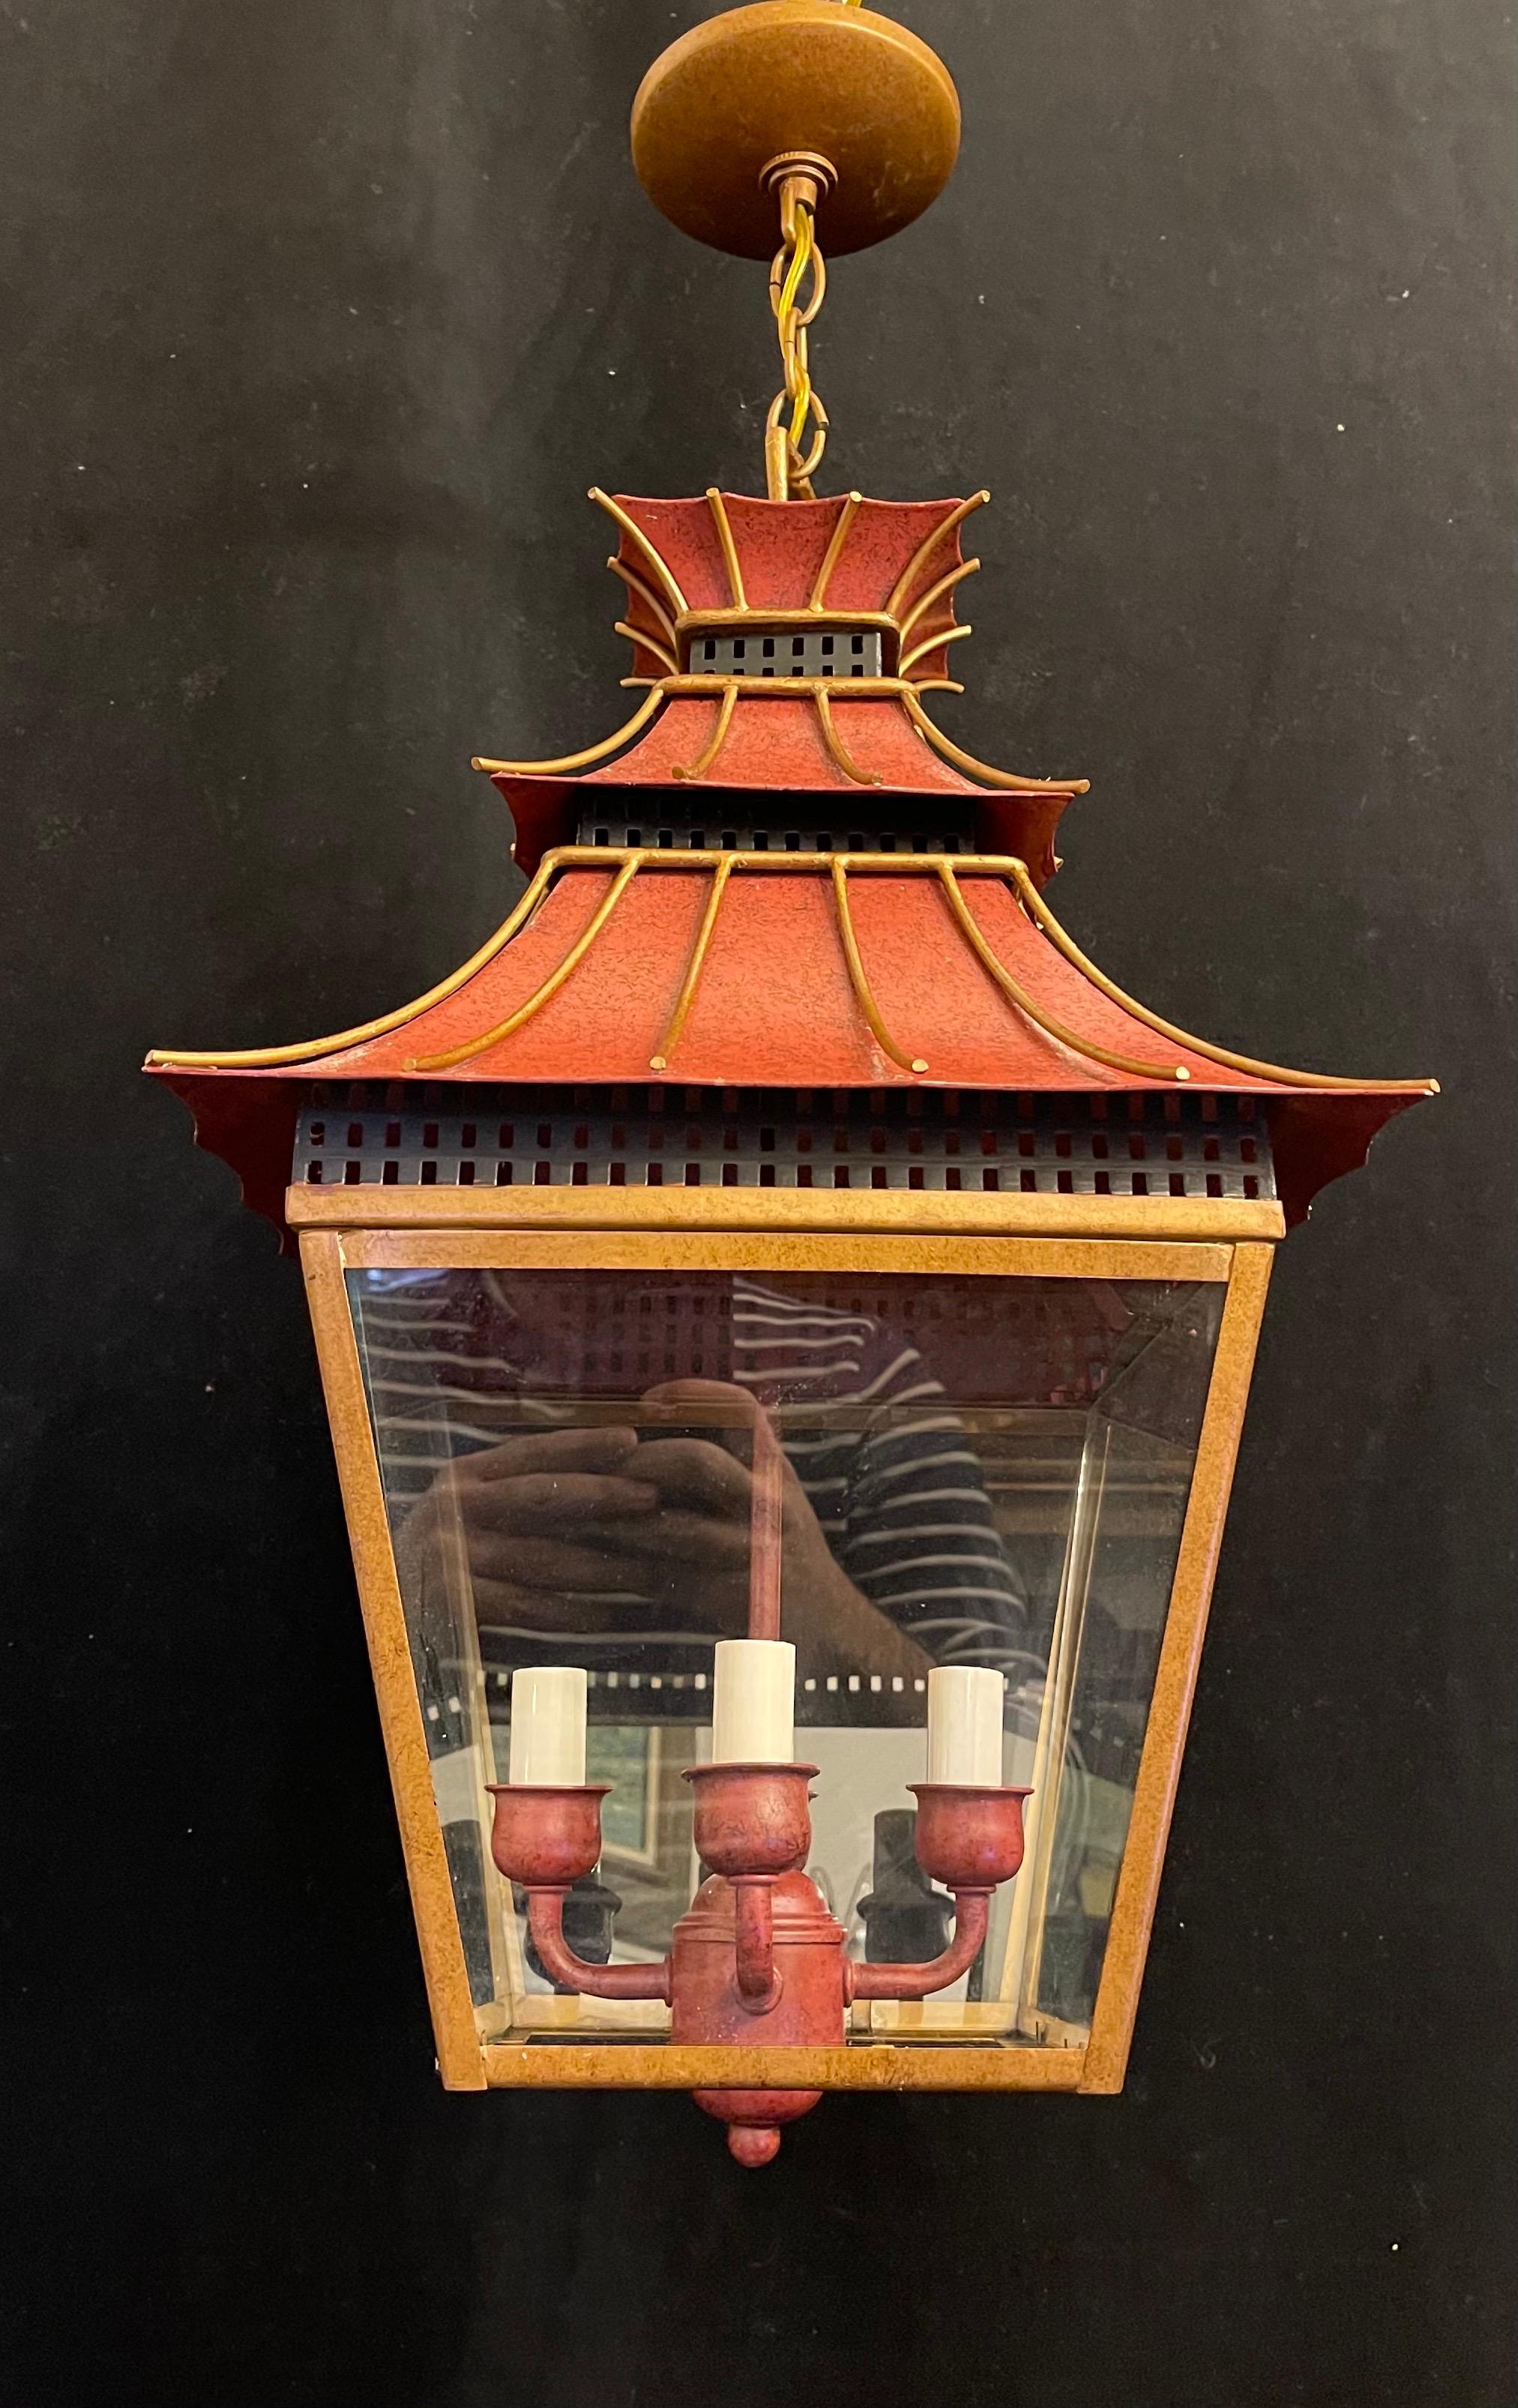 A wonderful vintage hand painted tole orange / red with gold gilt pagoda square glass panel 4 candelabra light chinoiserie form lantern fixture.